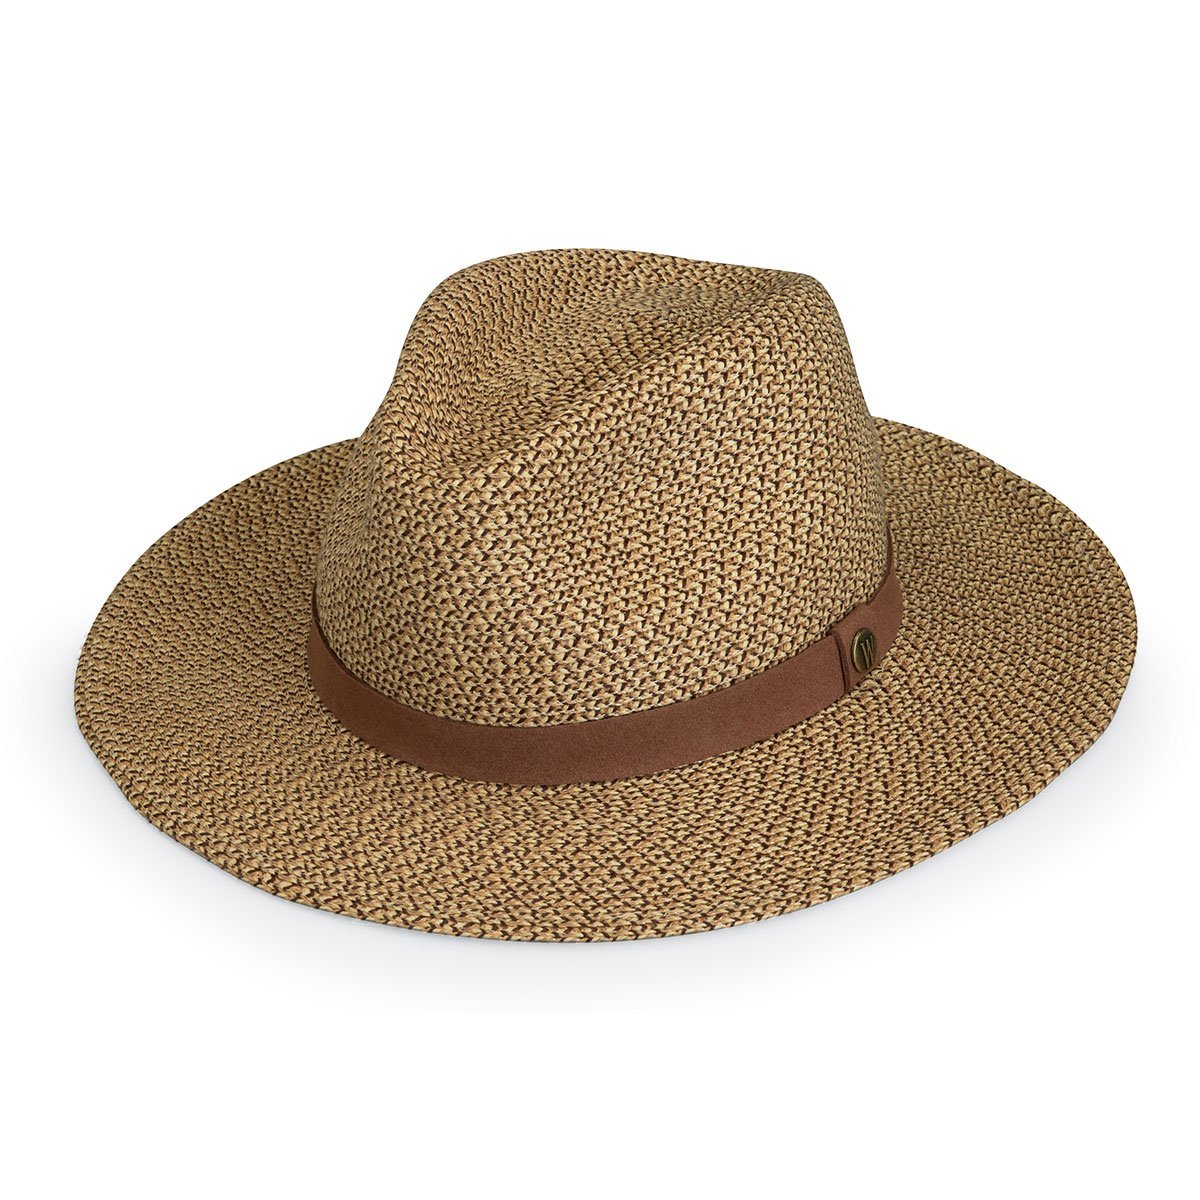 Featuring Front of Packable Unisex Fedora Style Outback UPF Sun Hat in Mixed Brown from Wallaroo